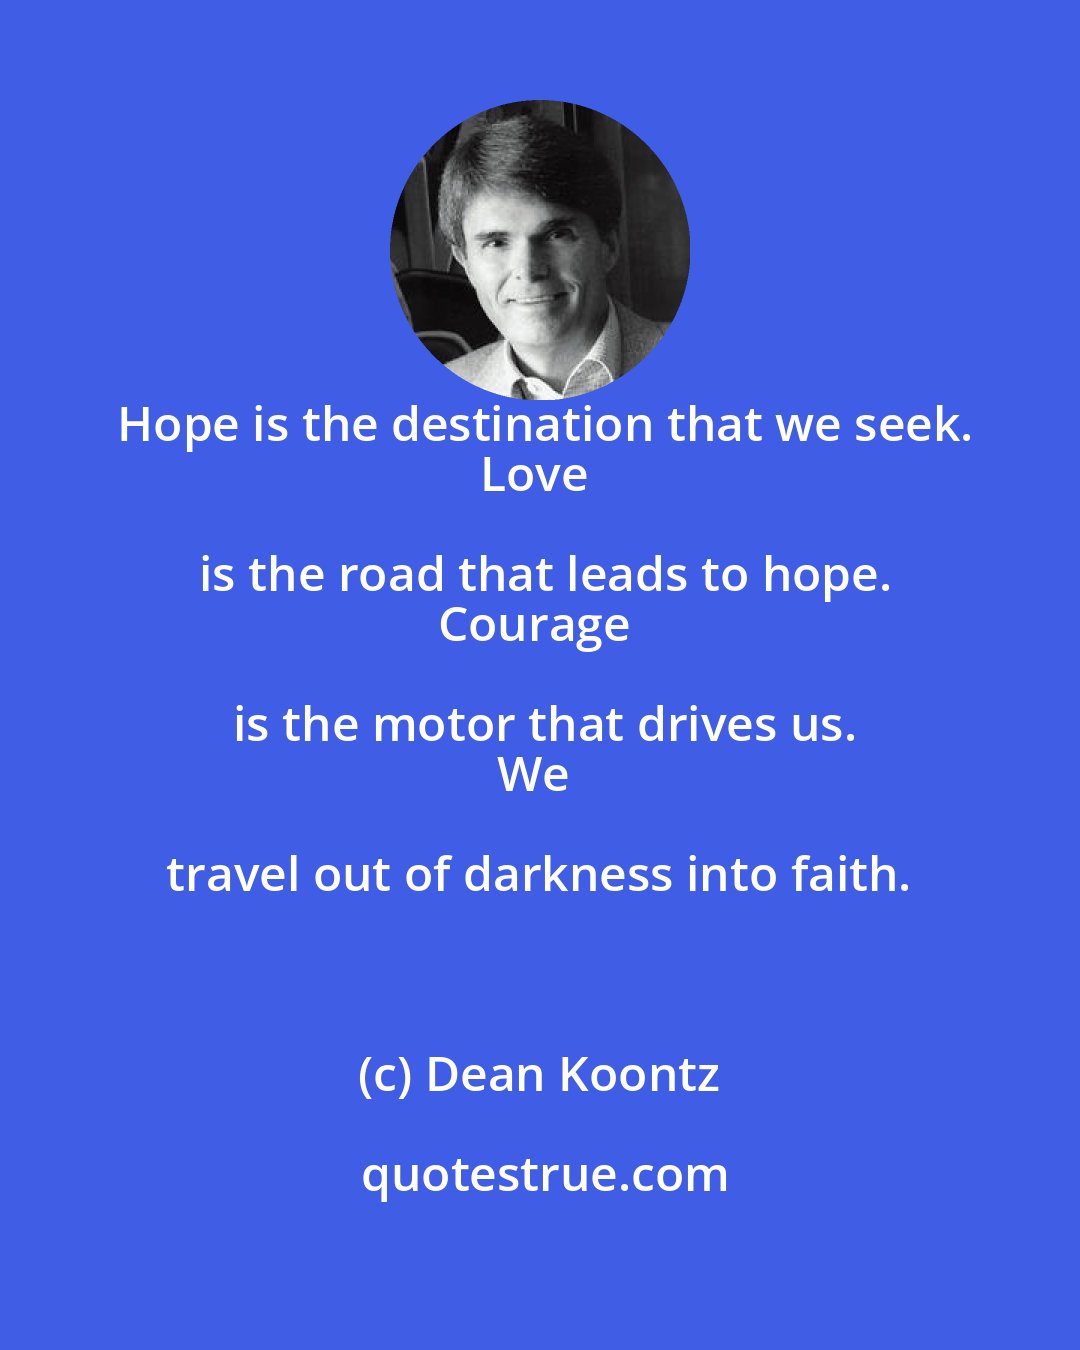 Dean Koontz: Hope is the destination that we seek.
Love is the road that leads to hope.
Courage is the motor that drives us.
We travel out of darkness into faith.